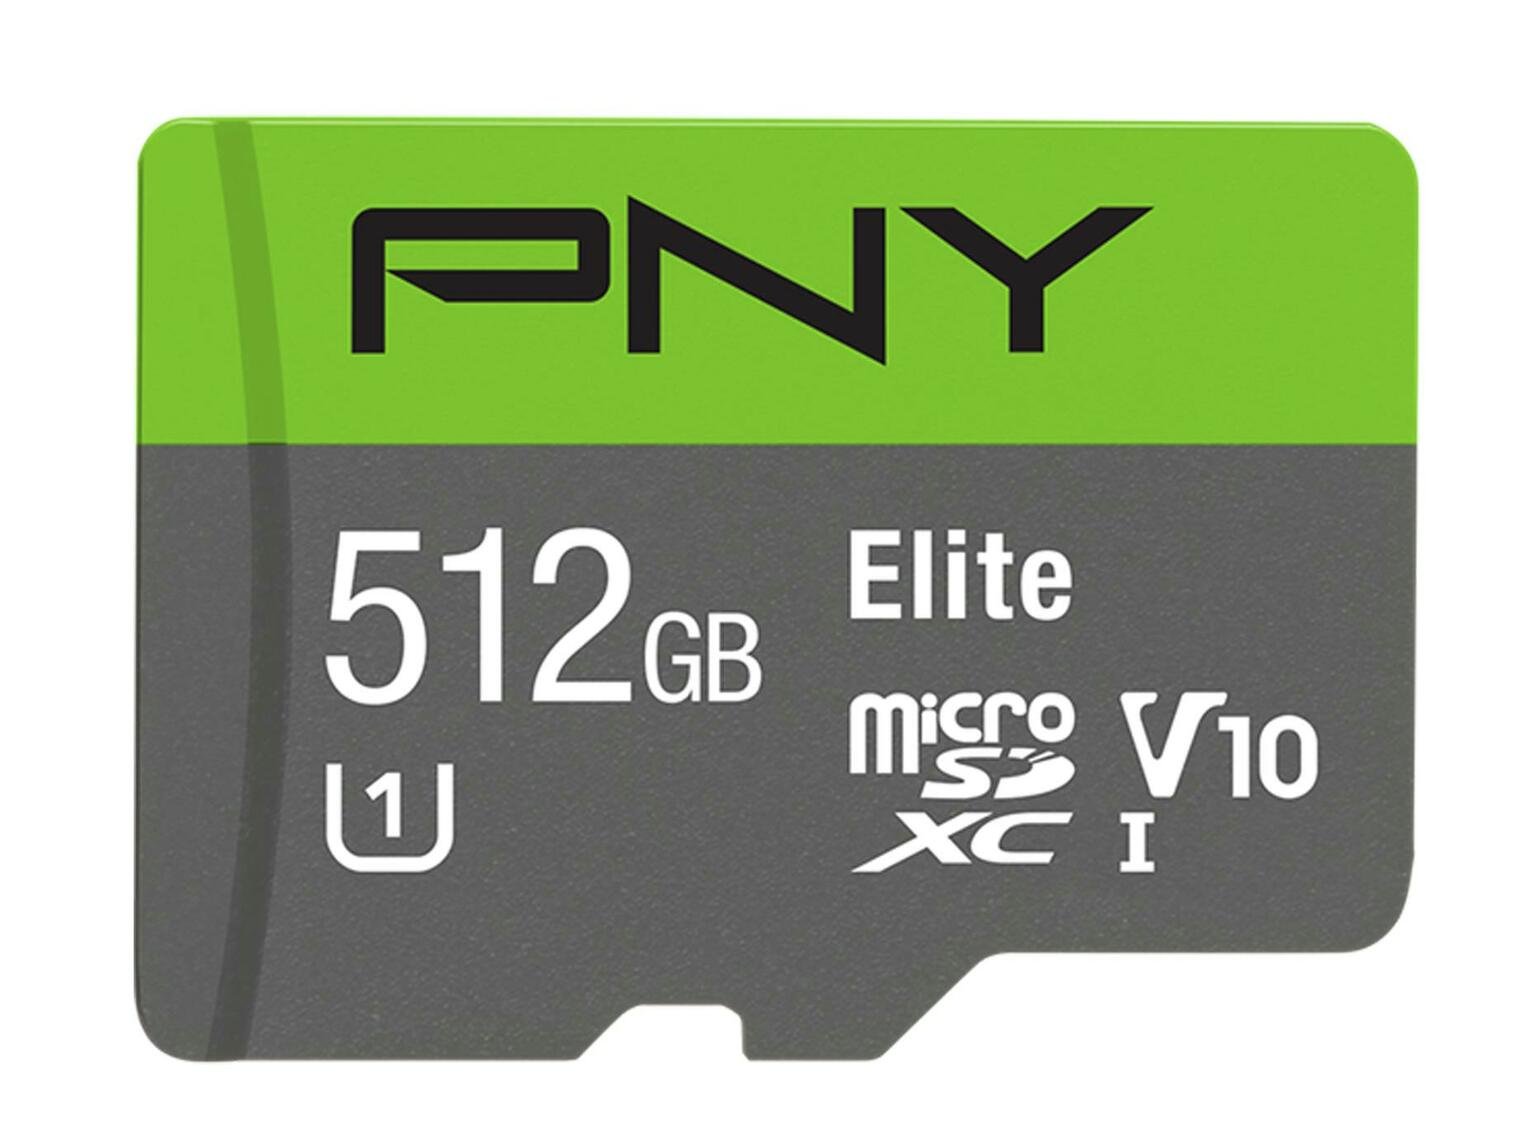 PNY Elite 100MBs microSD Memory Card Review